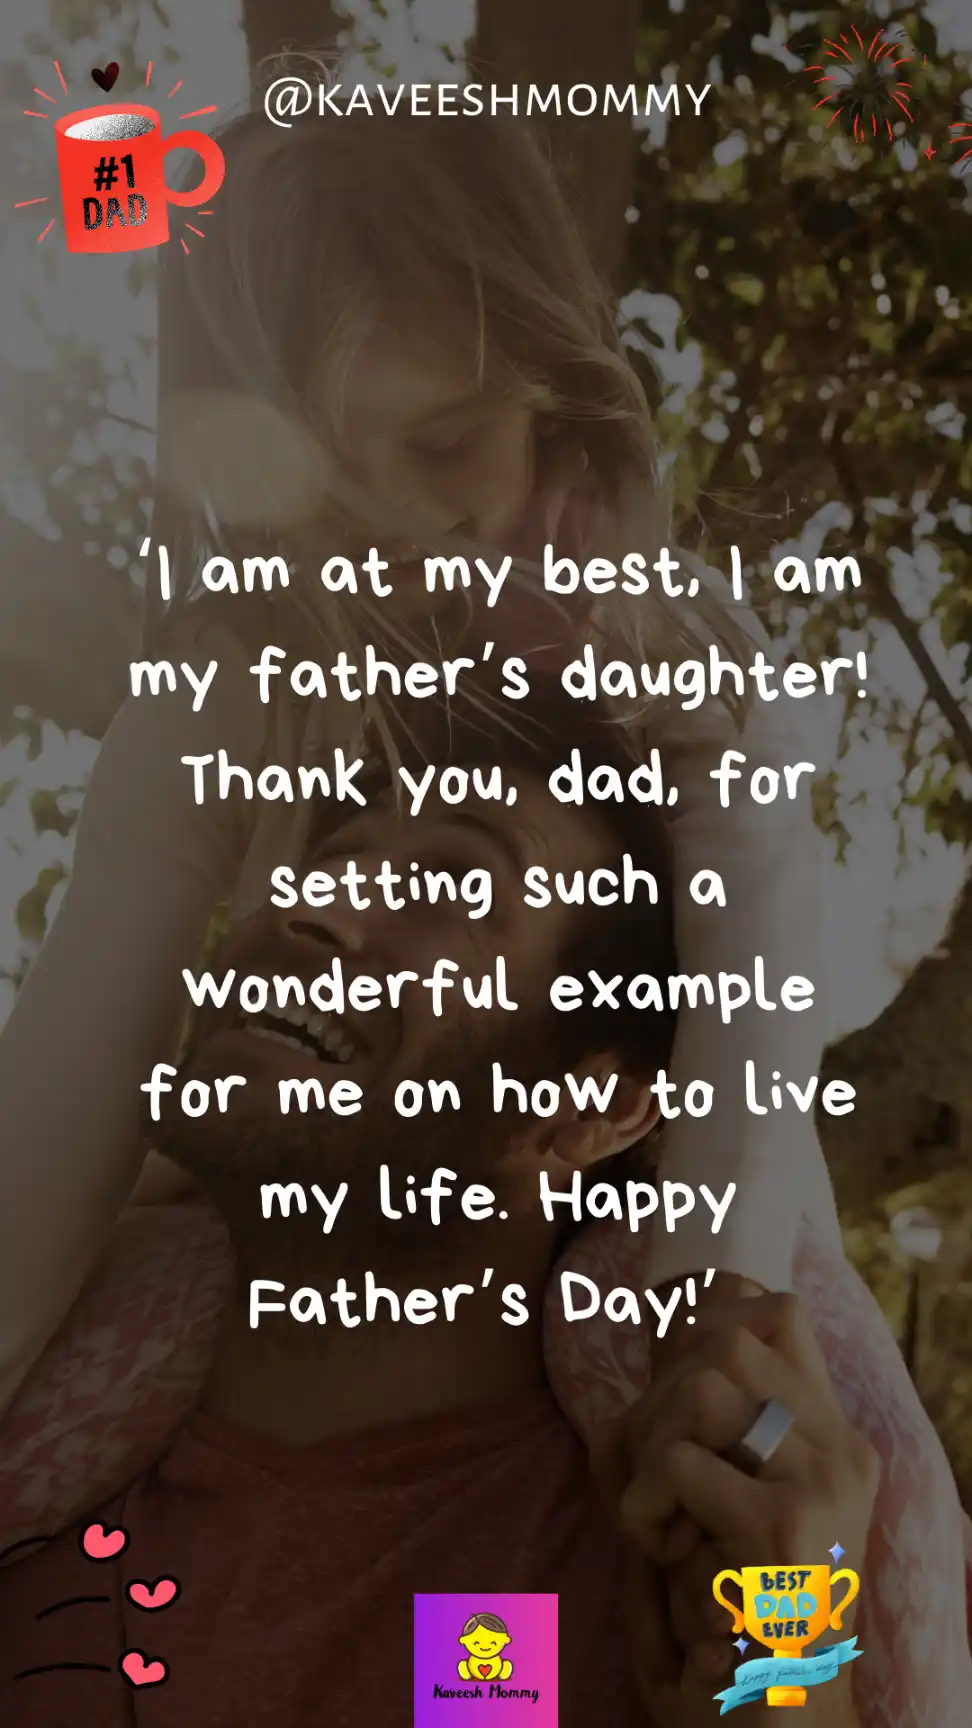 best wishes for father's day from daughter-‘I am at my best, I am my father’s daughter! Thank you, dad, for setting such a wonderful example for me on how to live my life. Happy Father’s Day!’